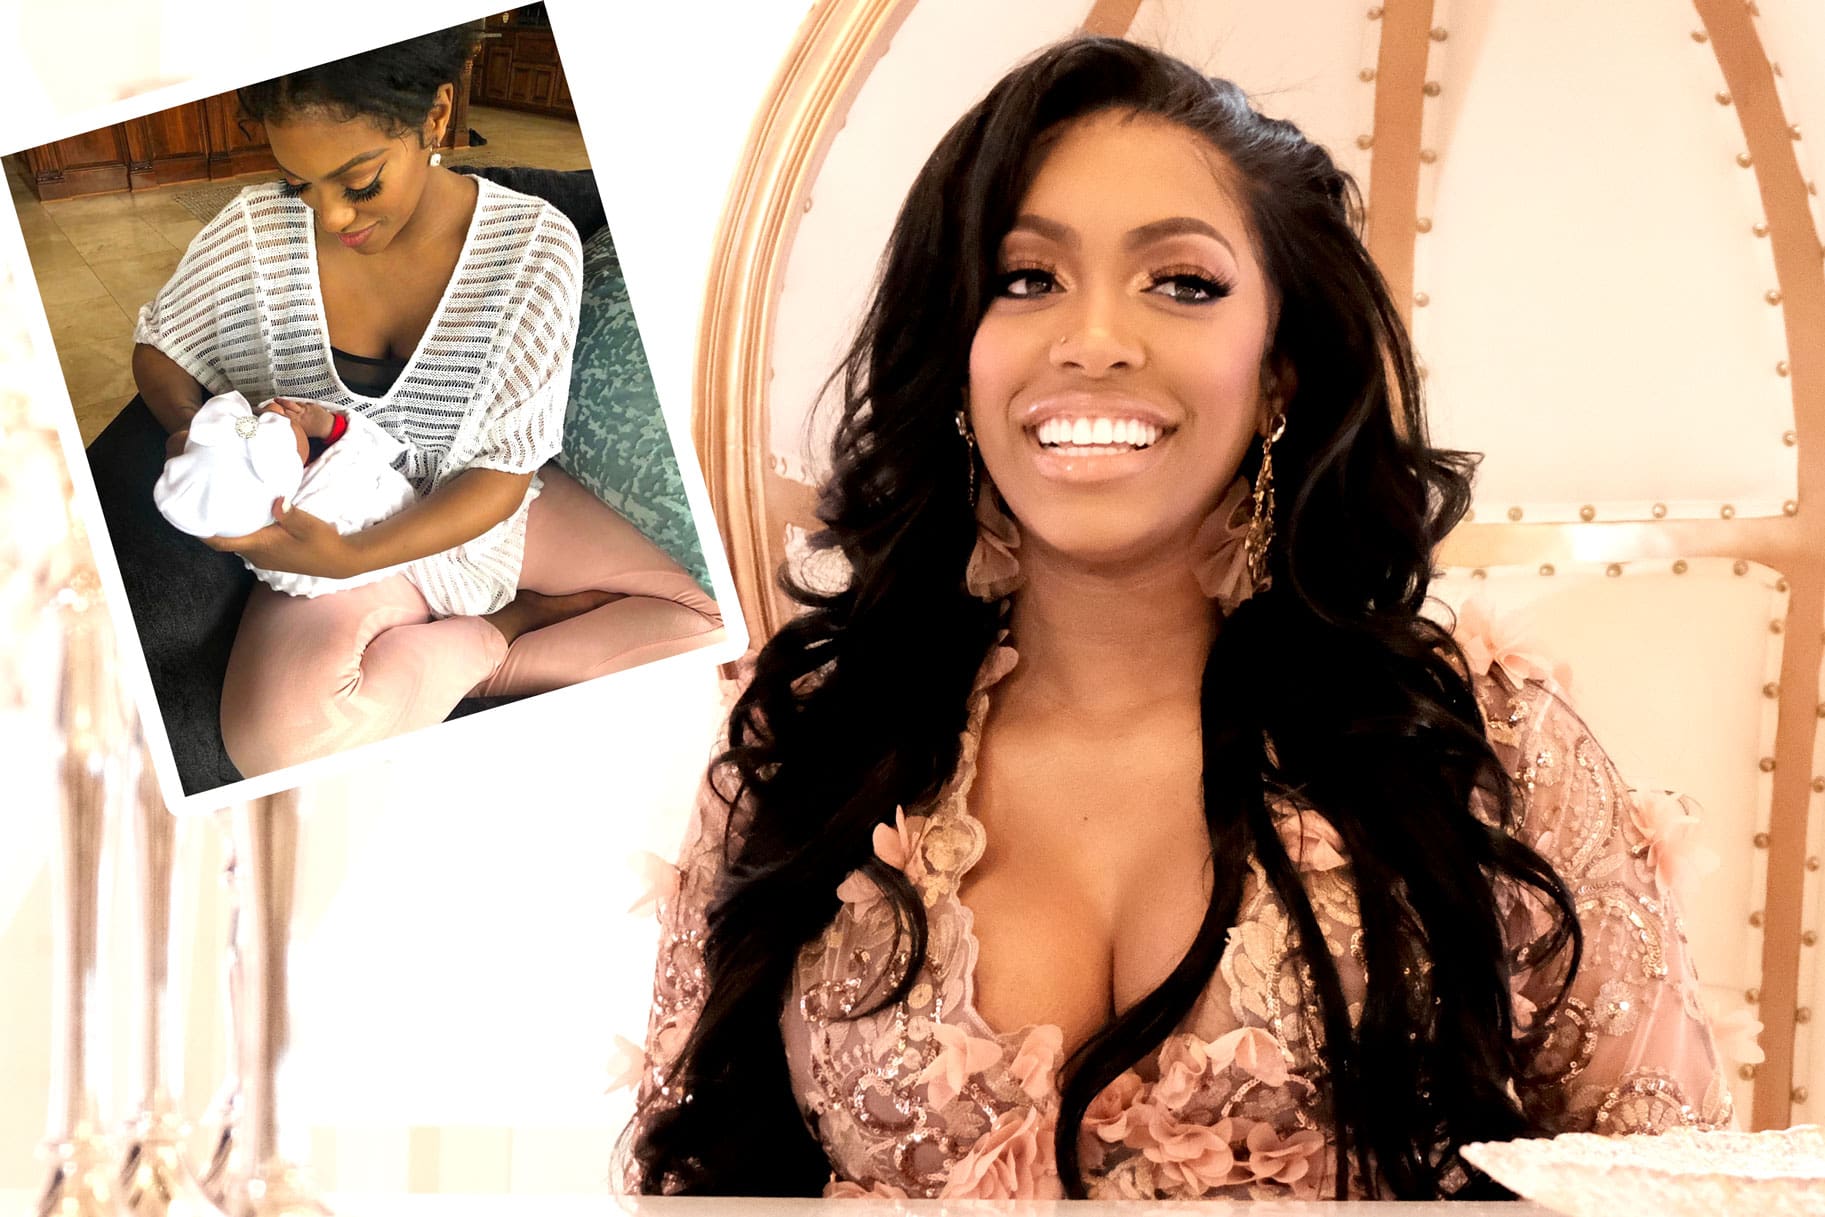 Porsha Williams Celebrates Two Months Since Pilar Jhena Came Into The World - She Makes Fans Happy With Gorgeous New Pics